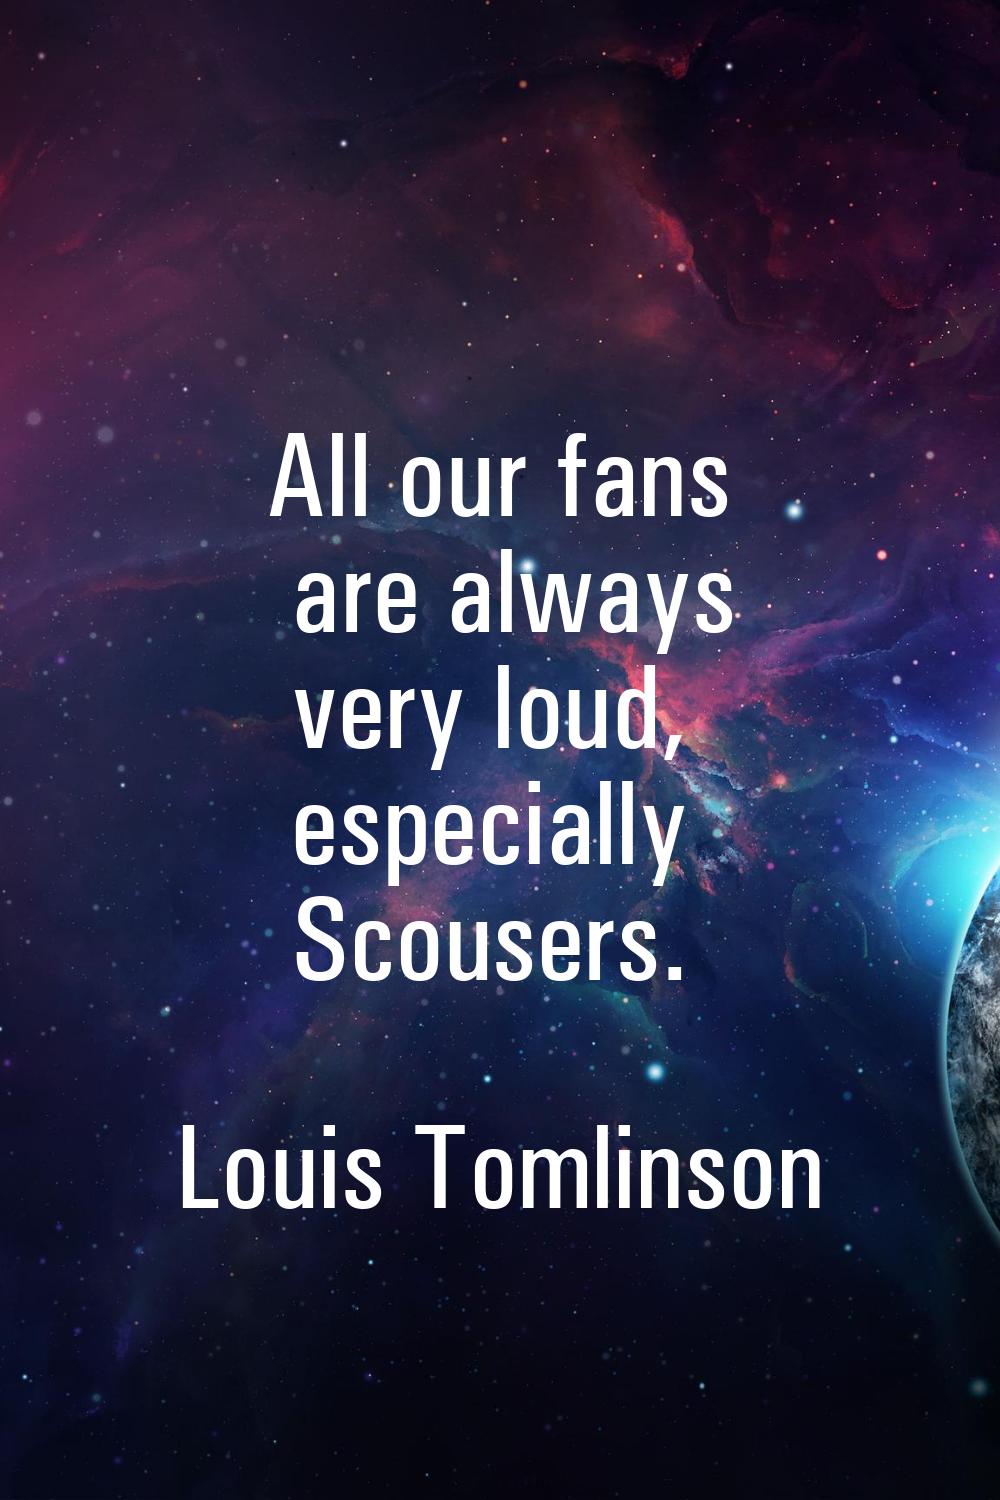 All our fans are always very loud, especially Scousers.